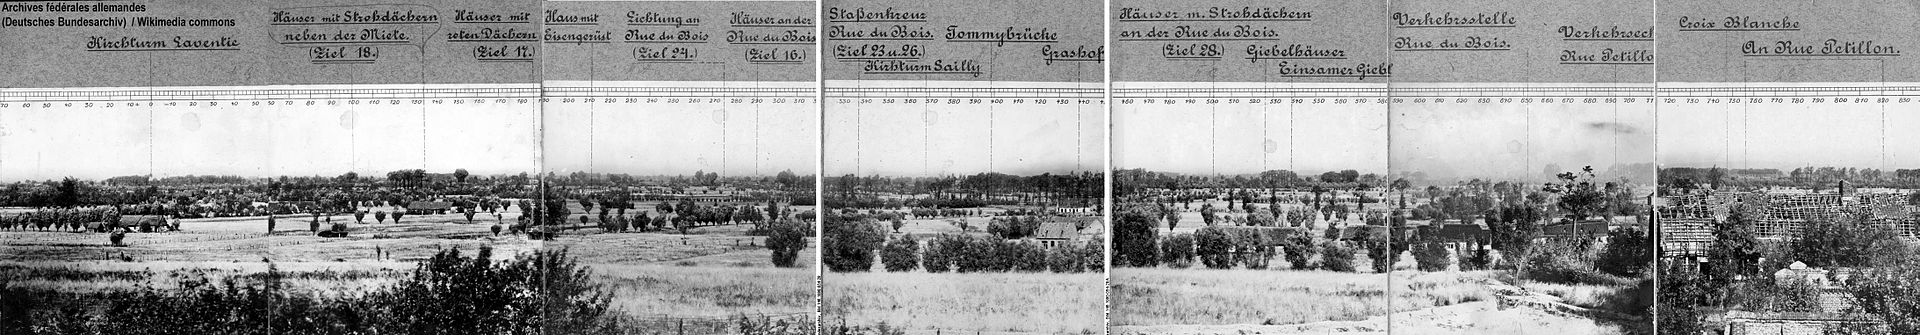 Fromelle_panoramique1914